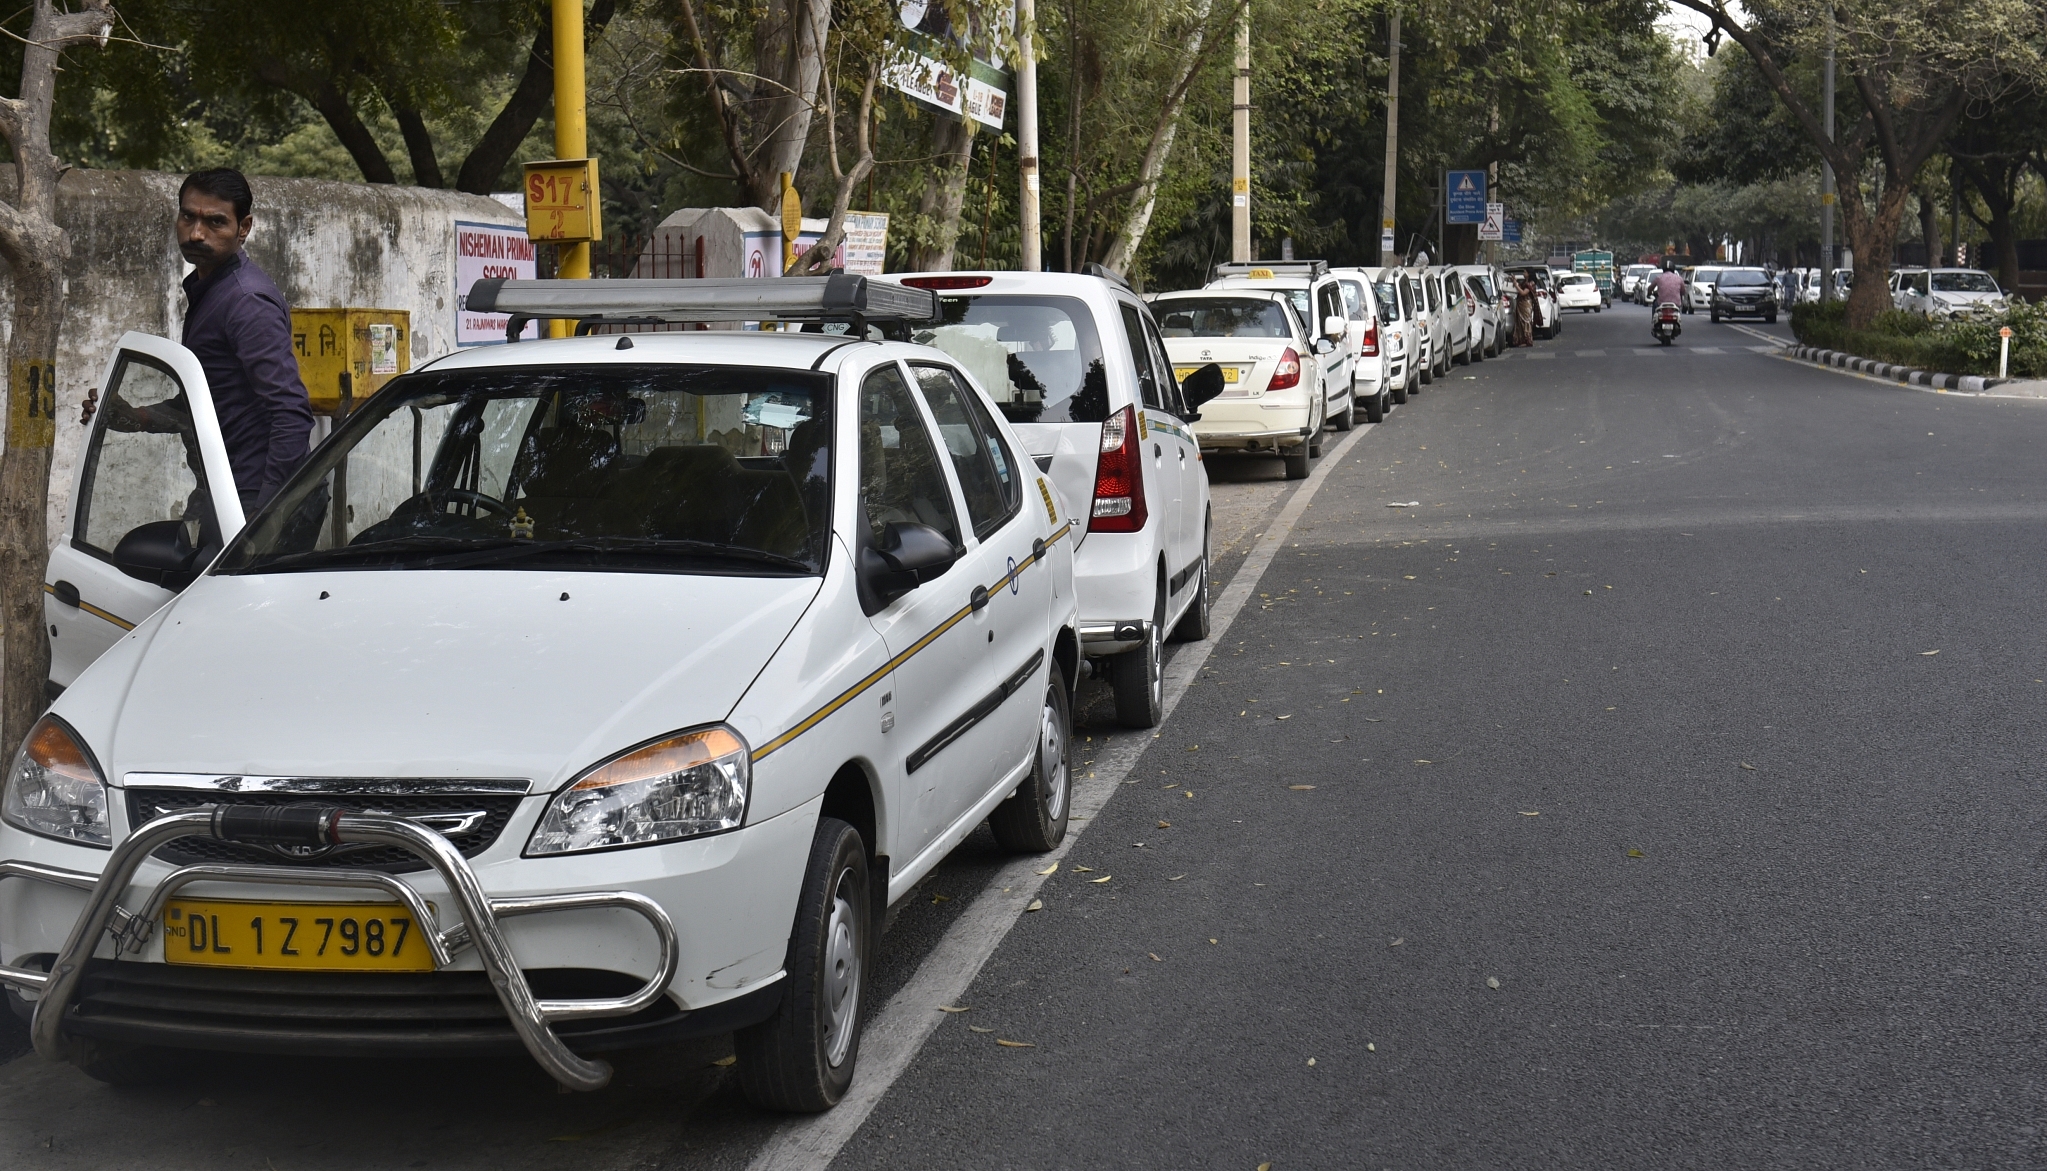 Cabs in Delhi (Sushil Kumar/Hindustan Times via Getty Images)